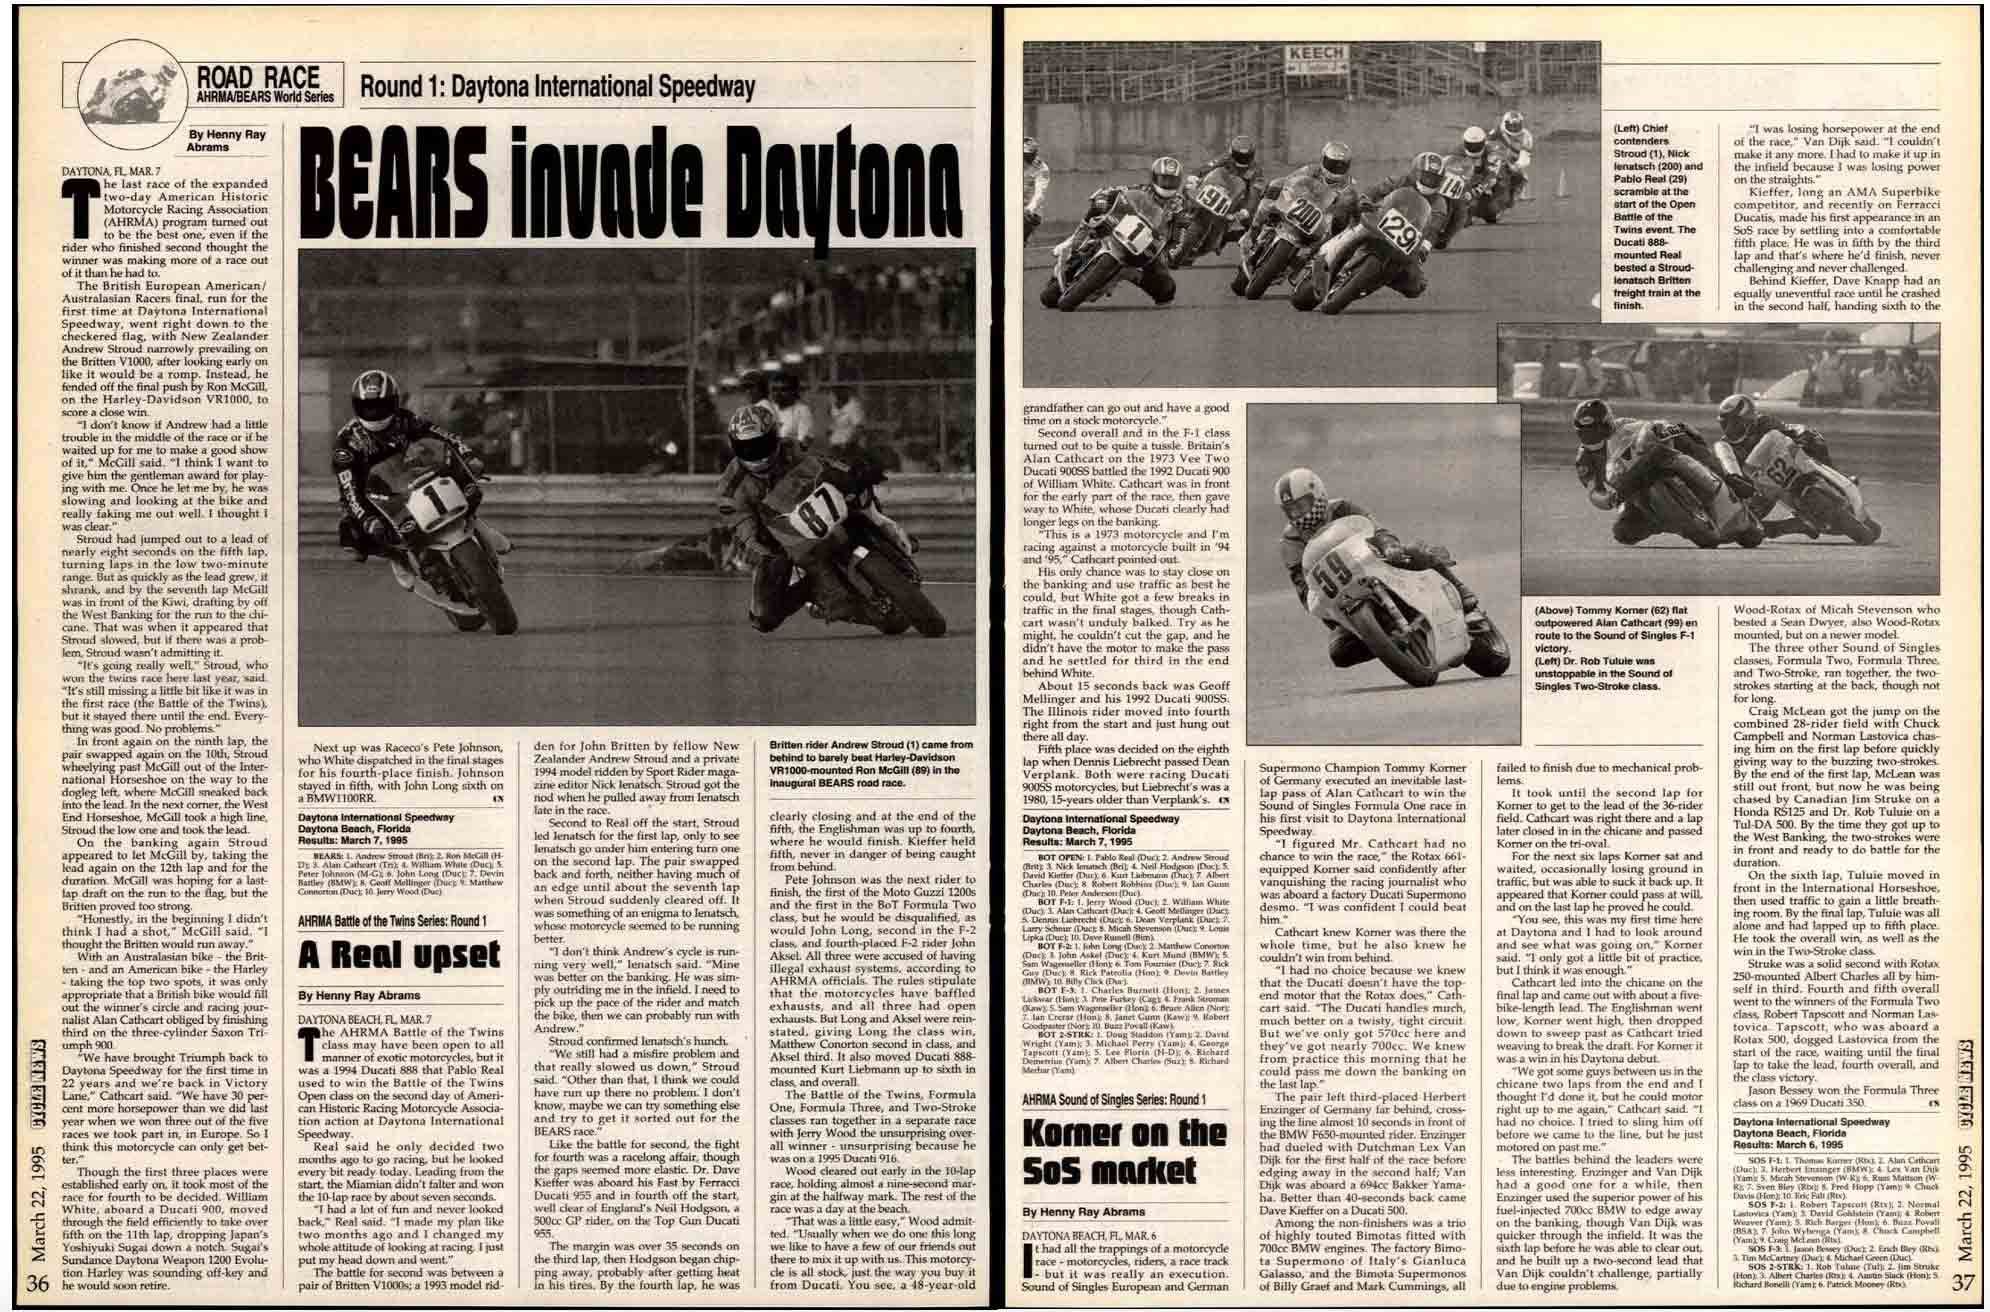 The March 22, 1995, issue of <i>Cycle News</i> documented Andrew Stroud’s win in the BEARS event, which he followed up with a second place in the AHRMA Battle of the Twins race, with <i>CW</i> contributor Nick Ienatsch hot on his heels in third.